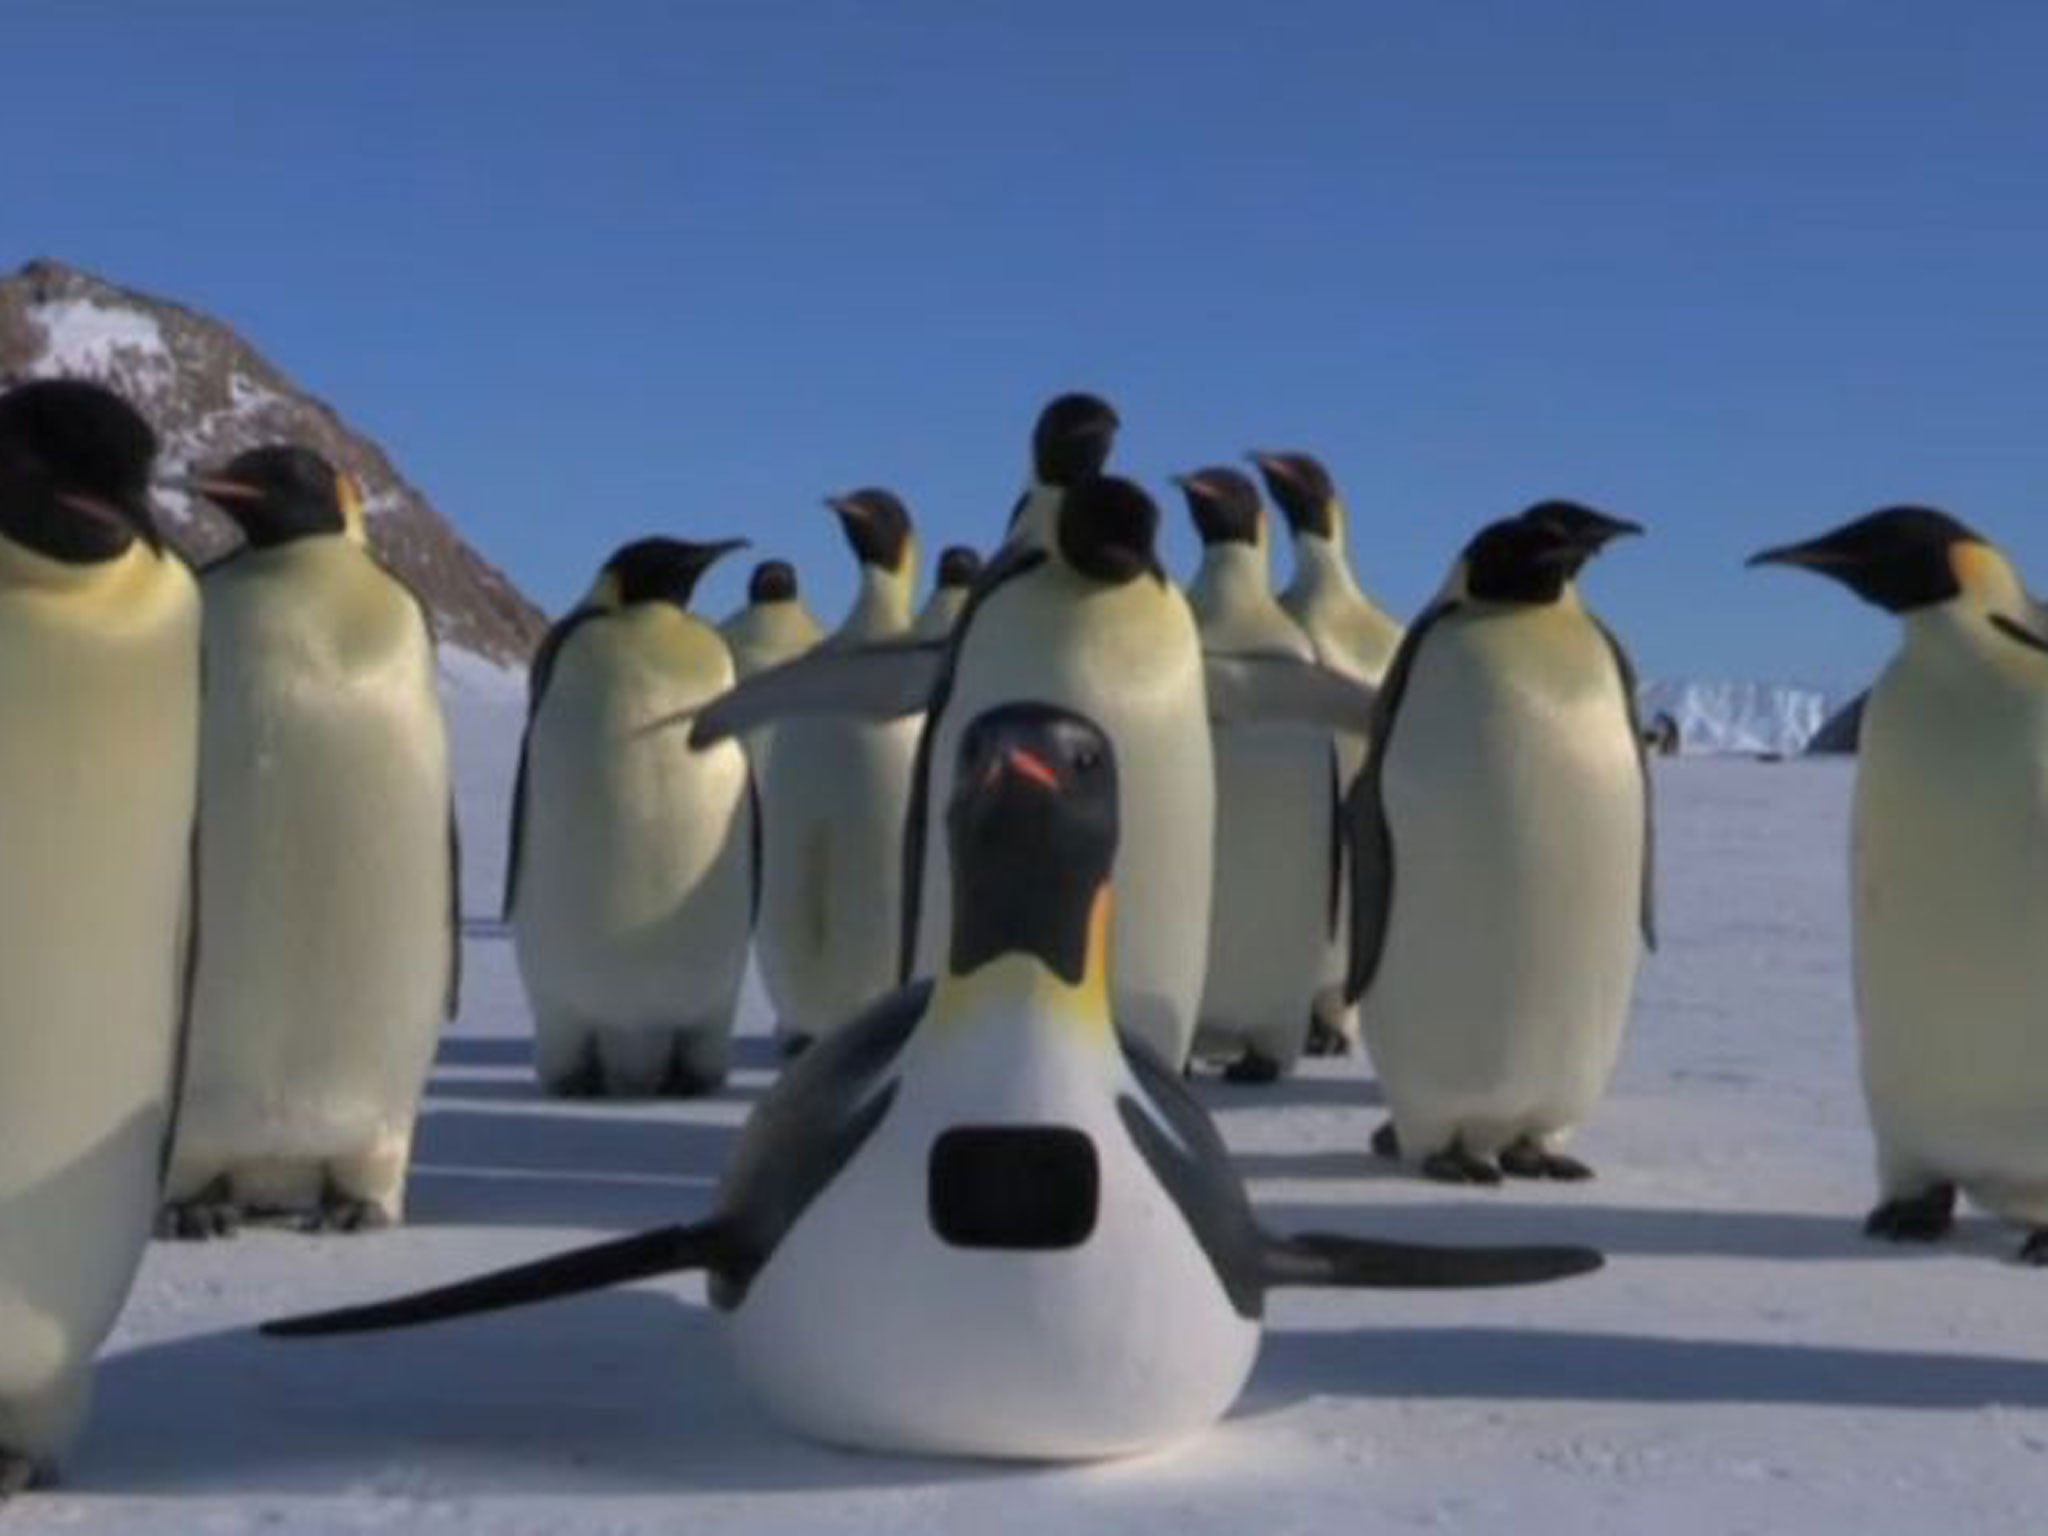 "Penguincam” was manoeuvred among a group of Antarctic Emperor Penguins for the filming of the BBC's Spy in the Huddle